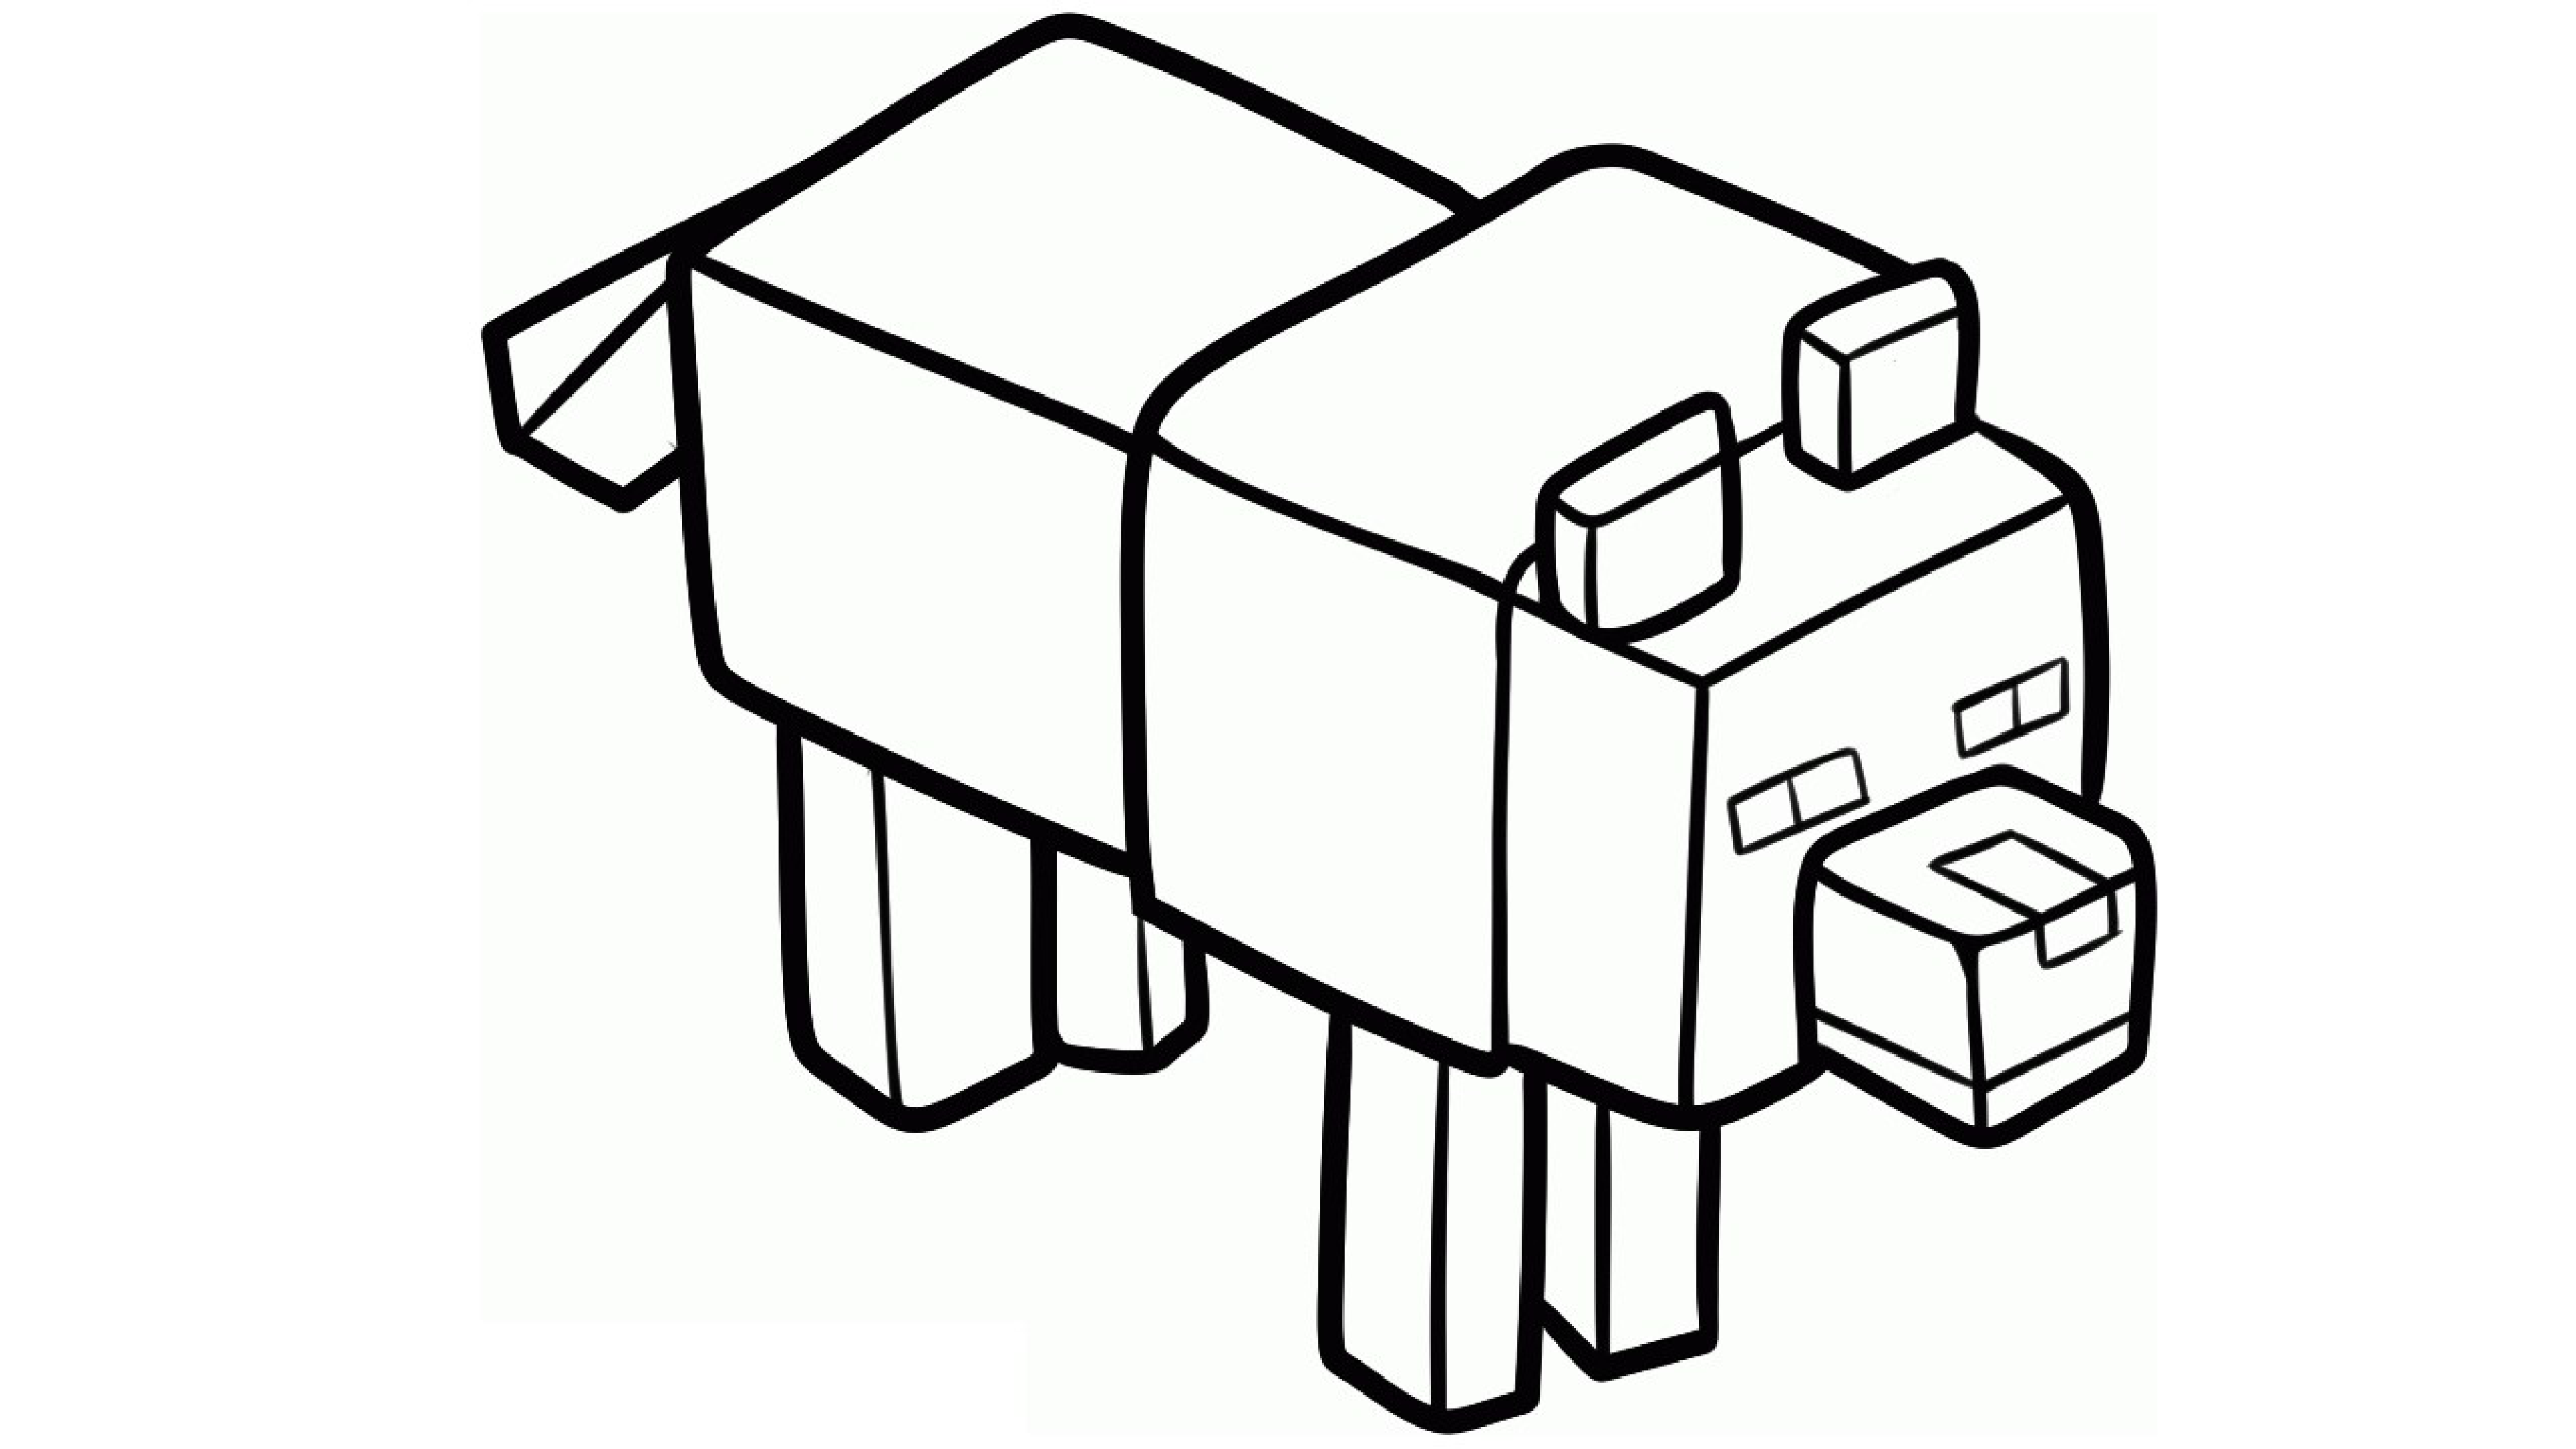 Minecraft Wolf Coloring Page | Templates at 